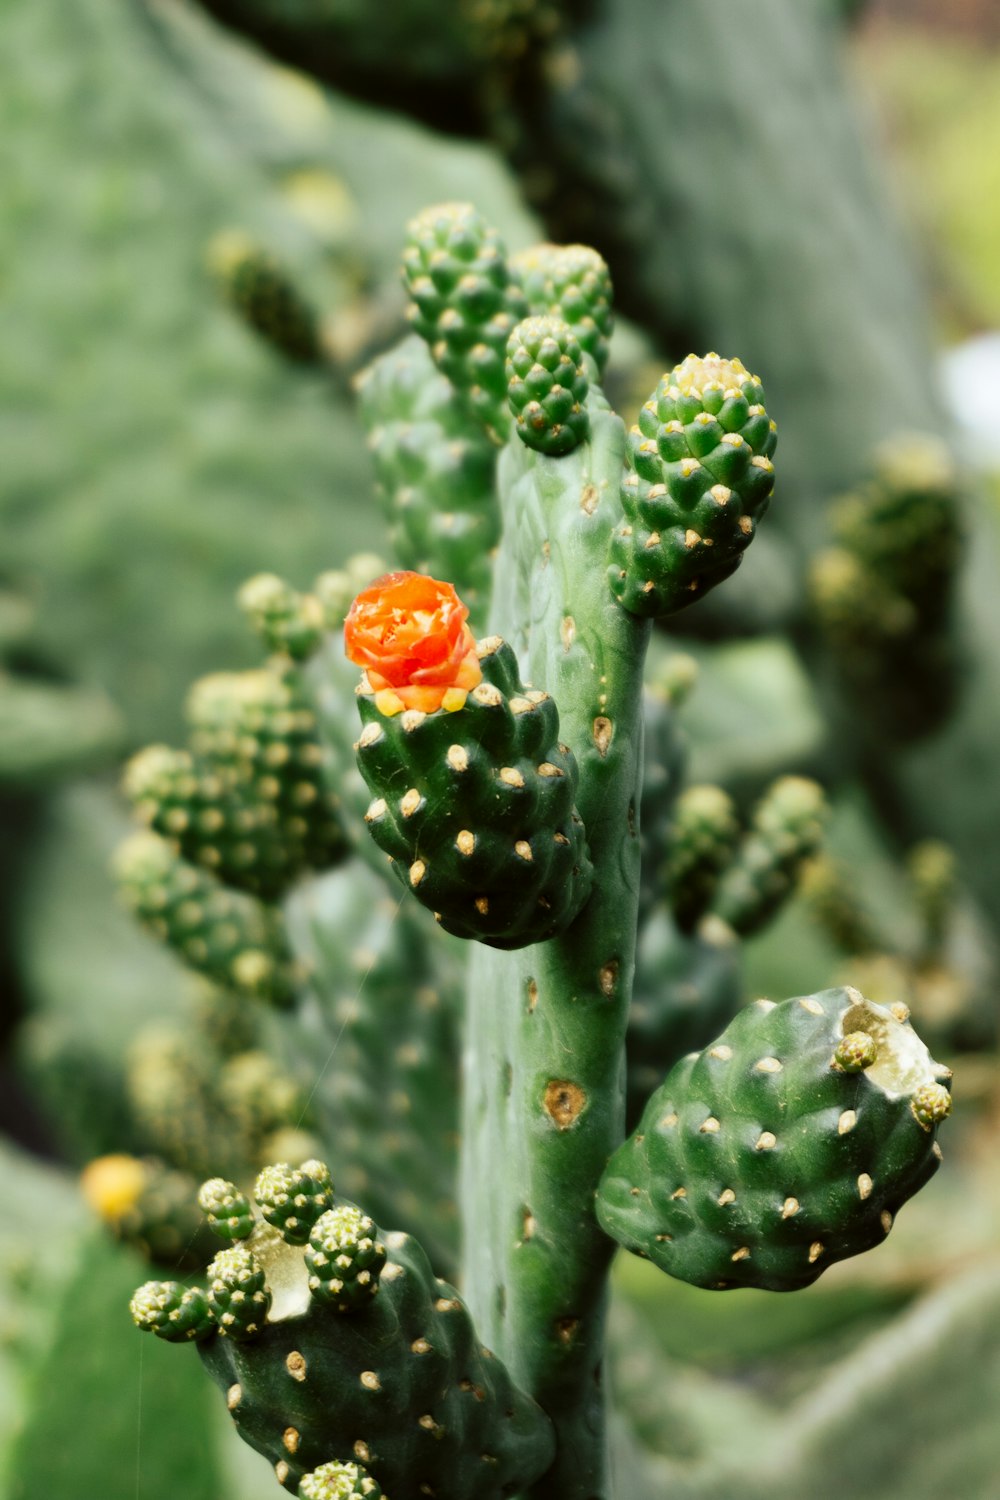 a close up of a green cactus with a red flower